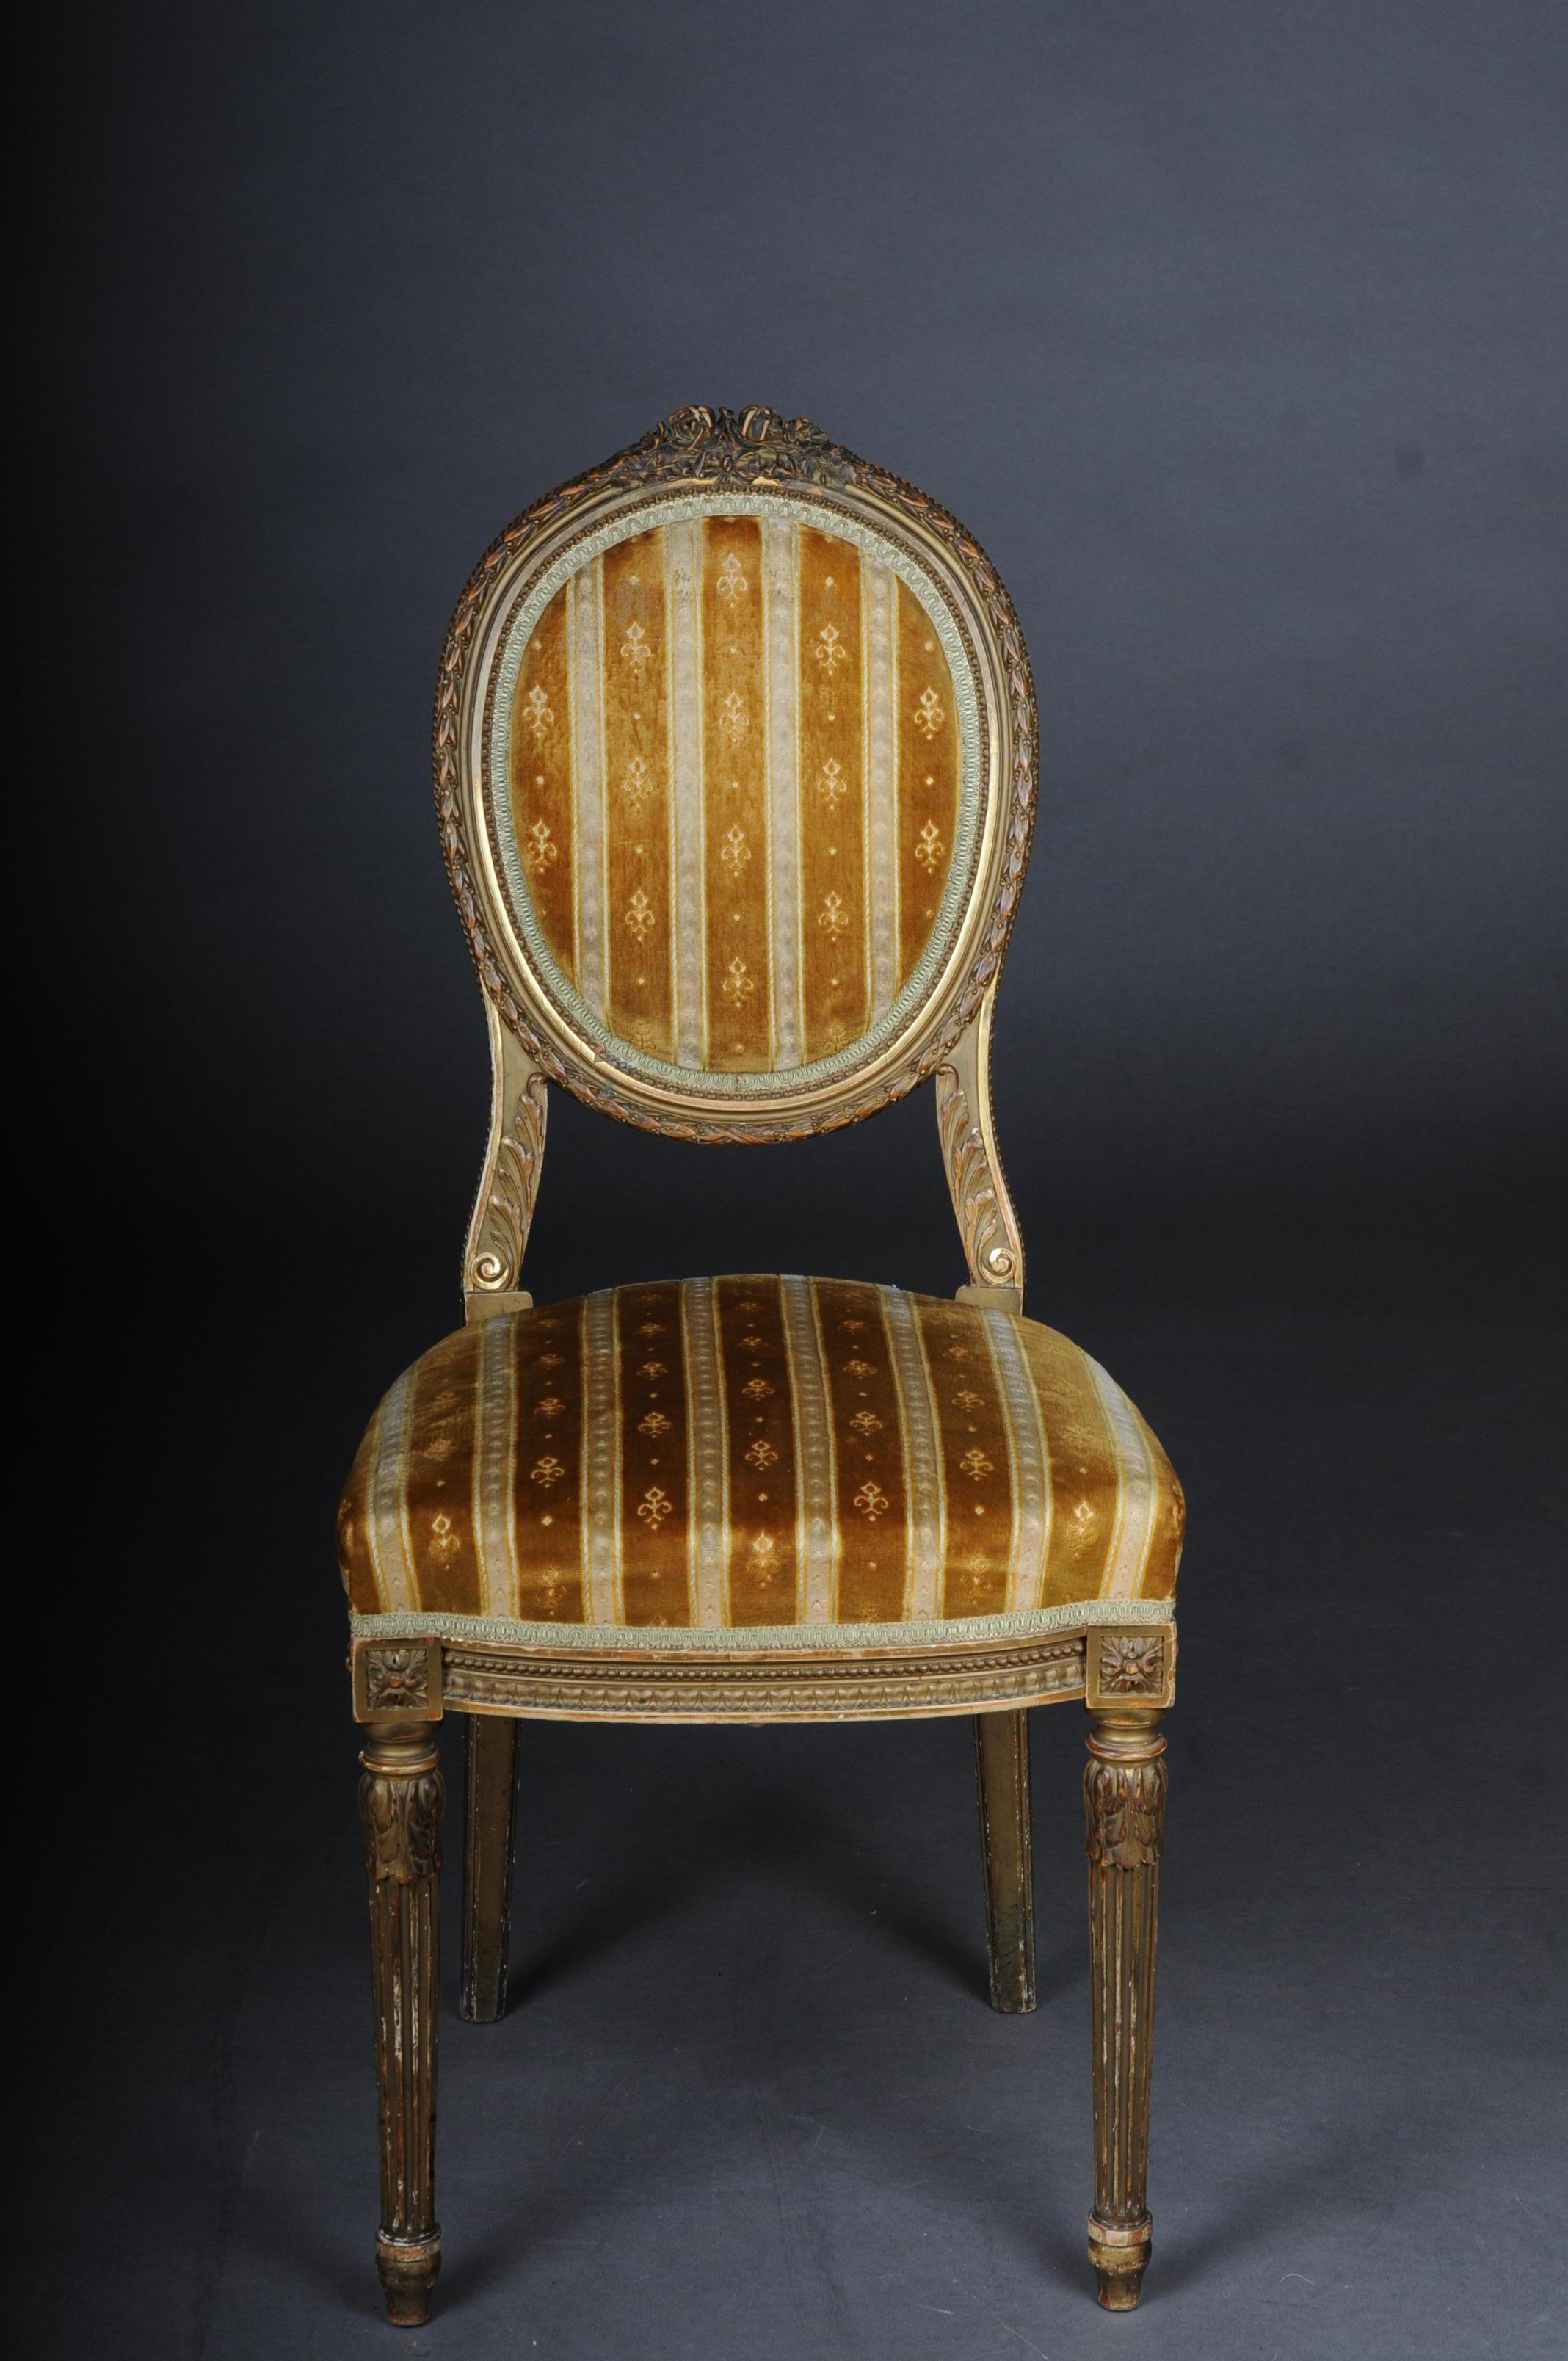 Pair of chairs St. Petersburg, Russia circa 1910 Jakob & Iosif Kone

High-quality Russian salon chairs from the furniture workshop Jokob & Iosif Kone, St. Petersburg, around 1910-1925.
Solid wood carved and gilded and partly gold-plated. Pointed